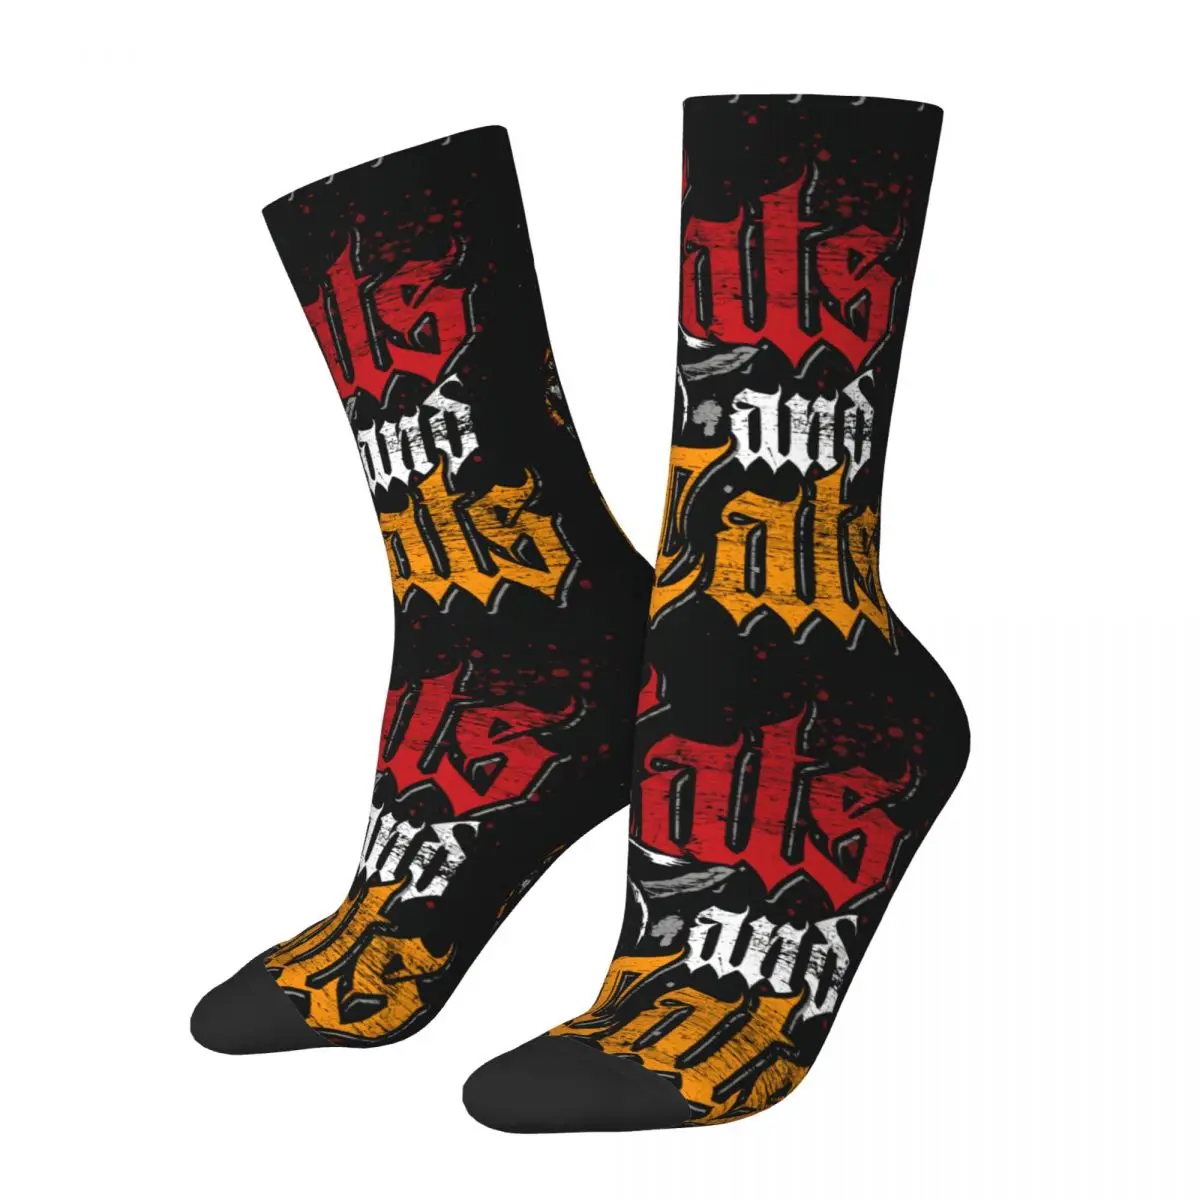 Funny Crazy Compression Sock for Men Tattoos And Cats Grunge Hip Hop Harajuku Tattoo Style Happy Seamless Printed Boys Crew Sock